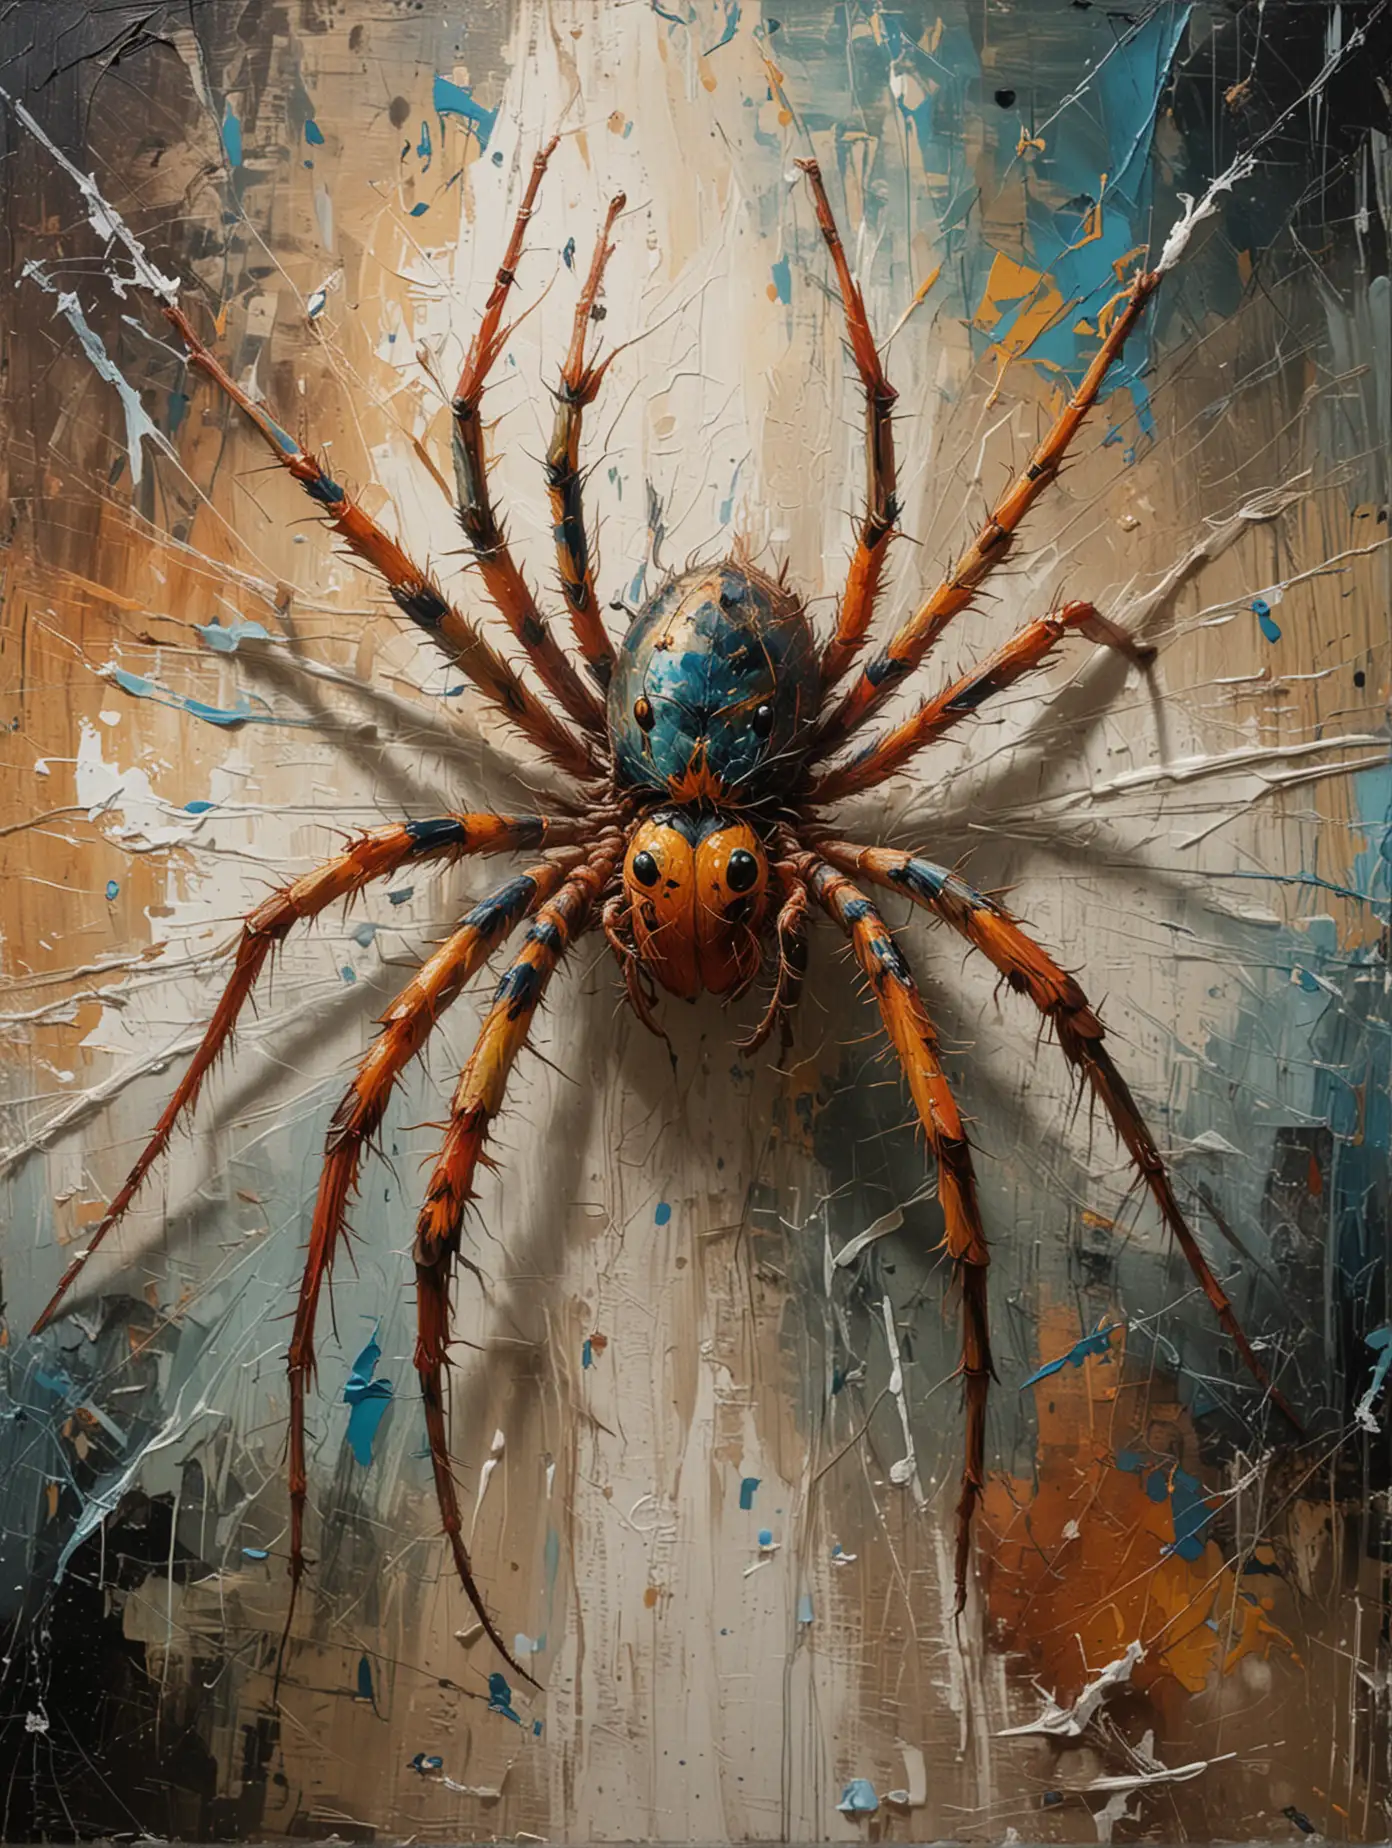 Abstract Spider Painting on Flaking Canvas